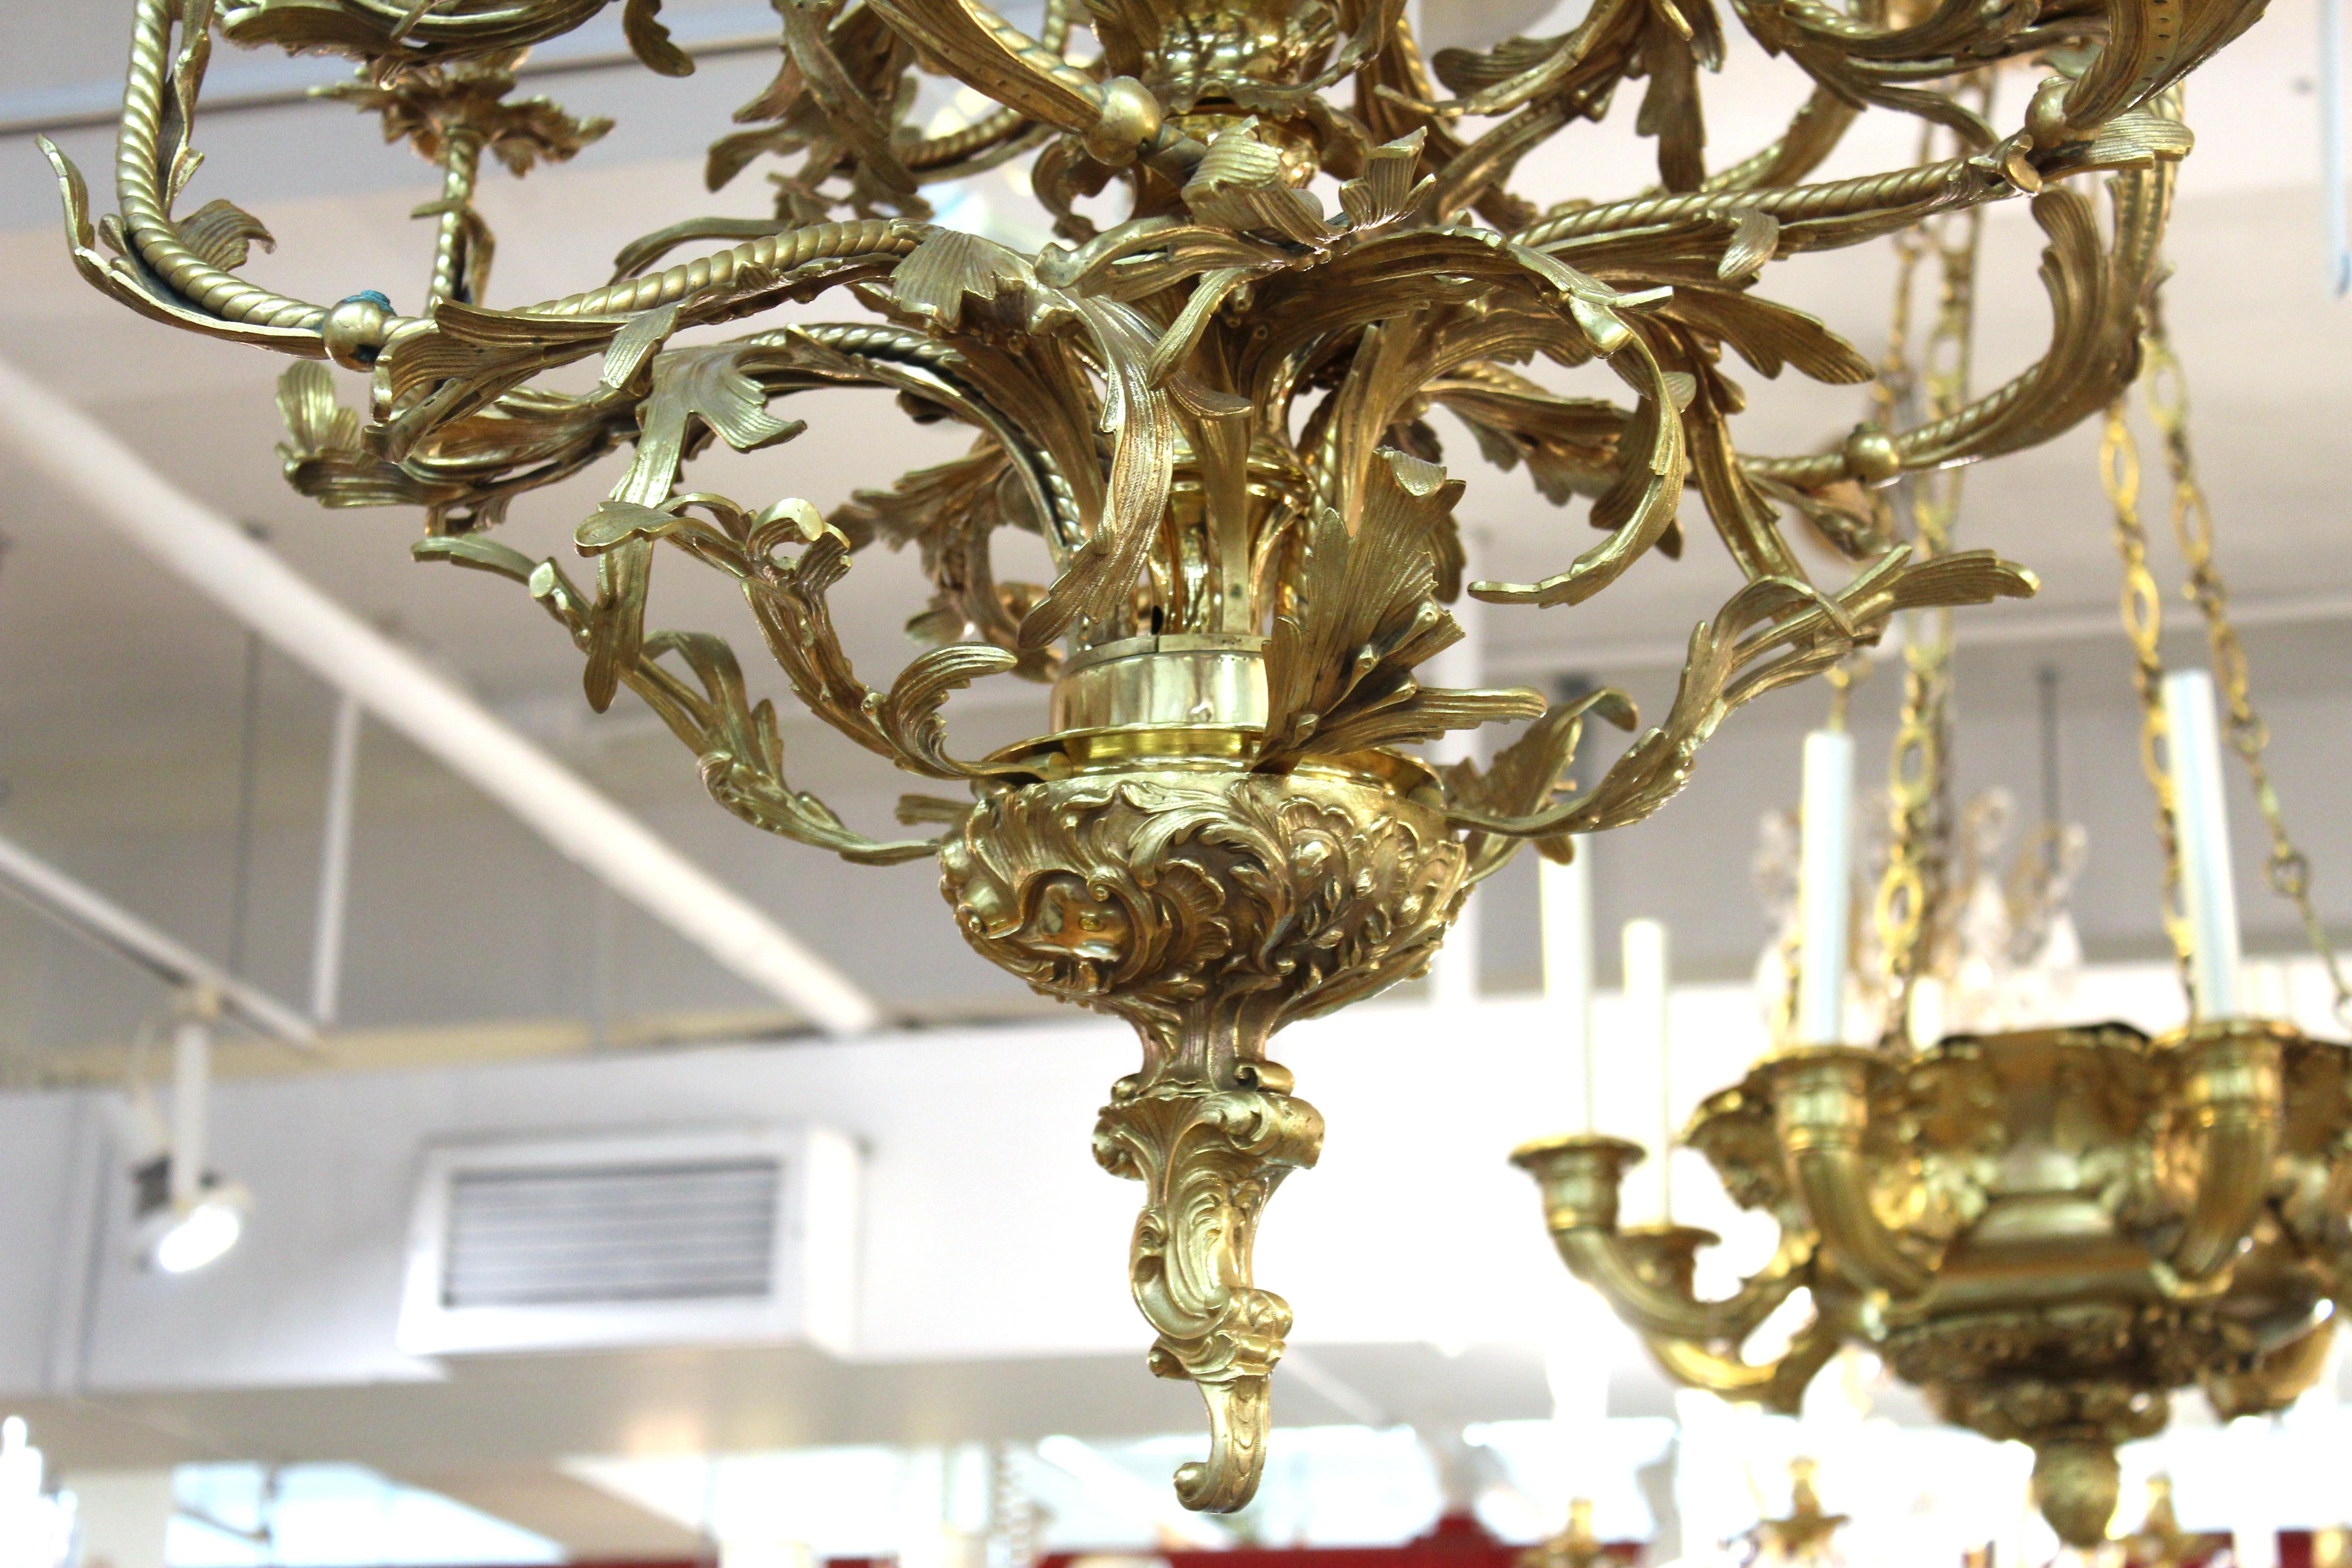 Continental Baroque style twelve arm ormolu chandelier with bronze putto seated in stem. Measures: 55